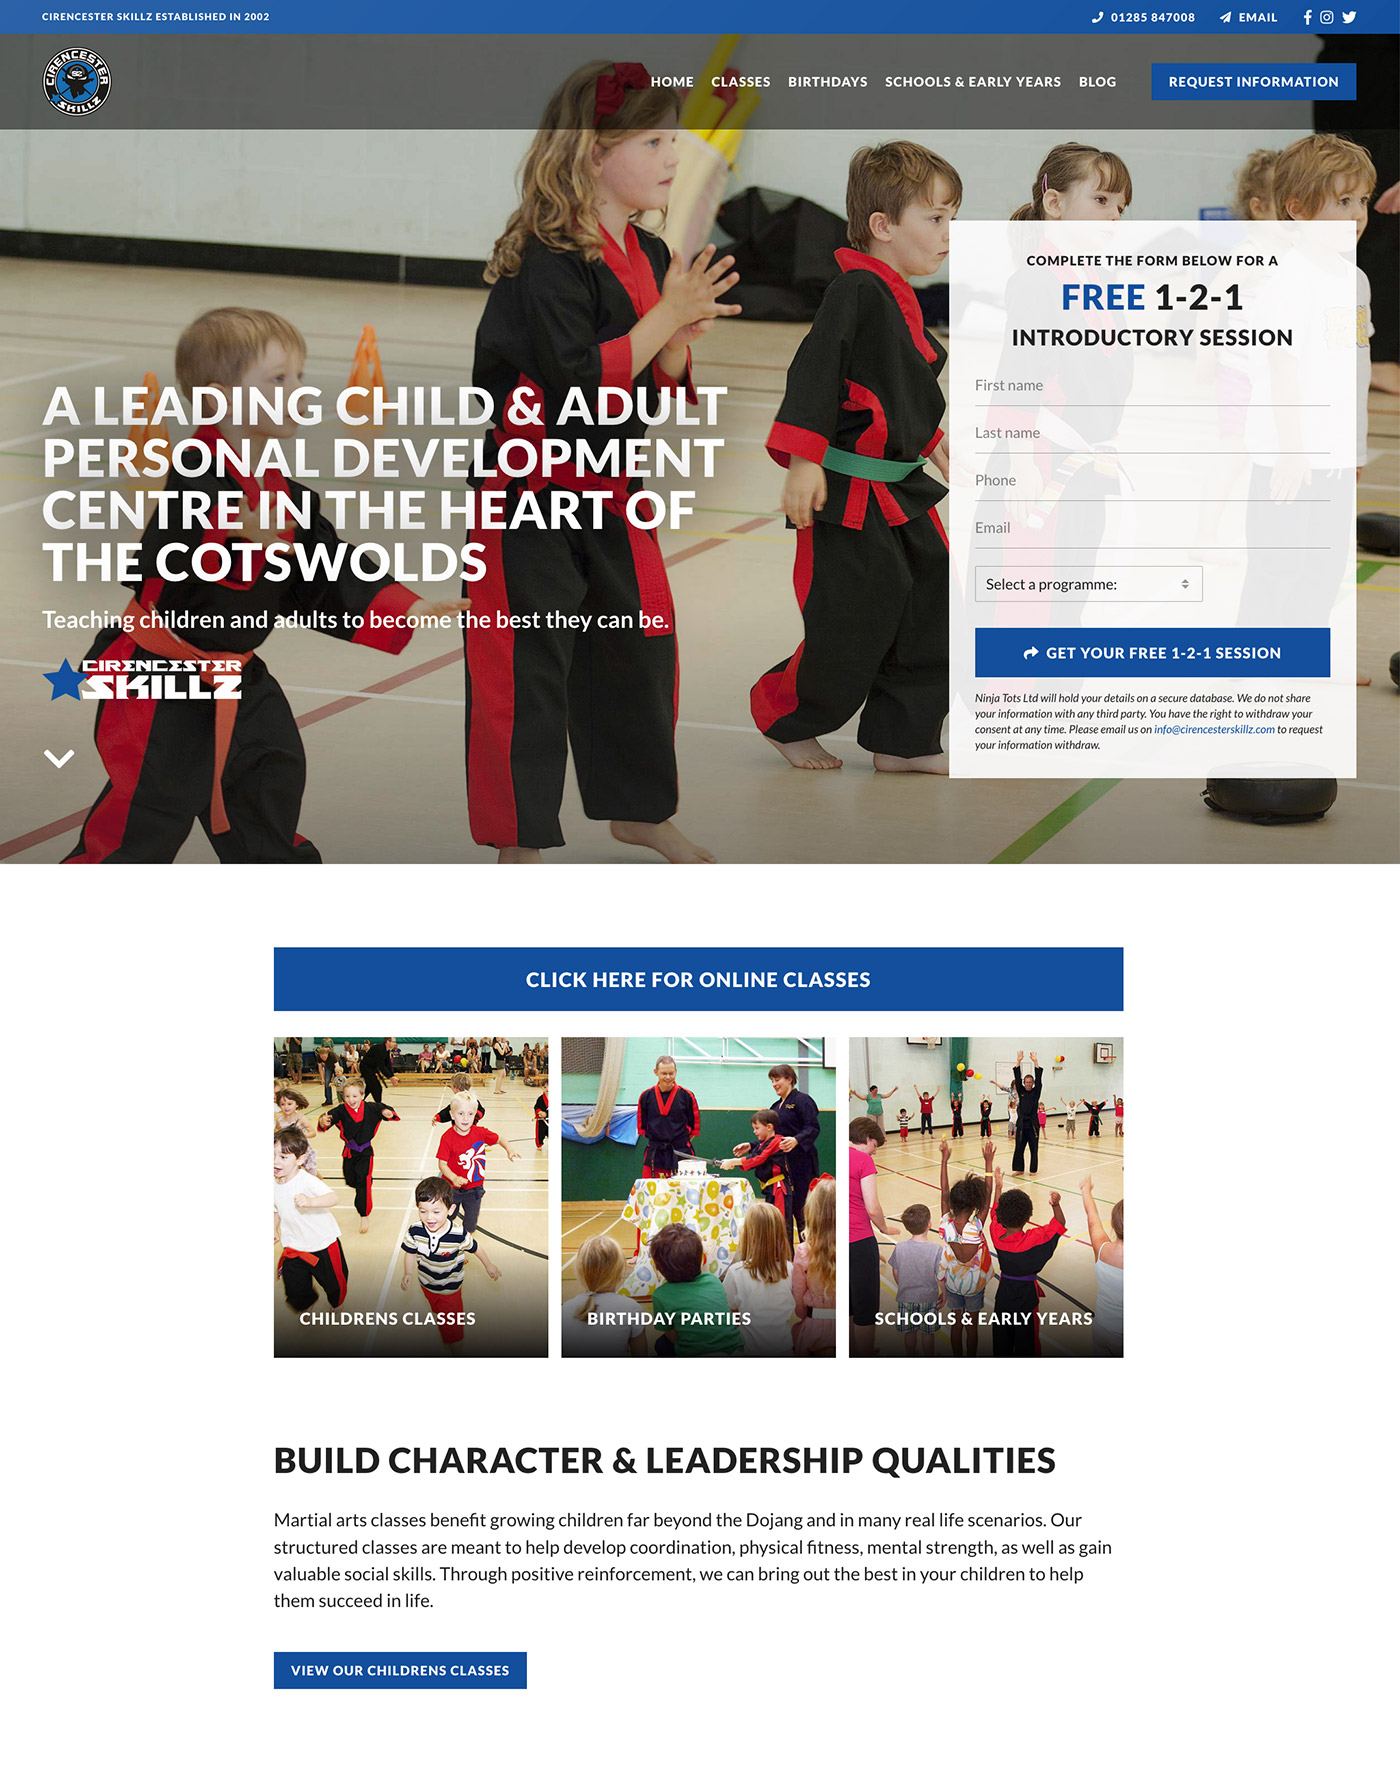 Cirencester SKILLZ Website Home Page